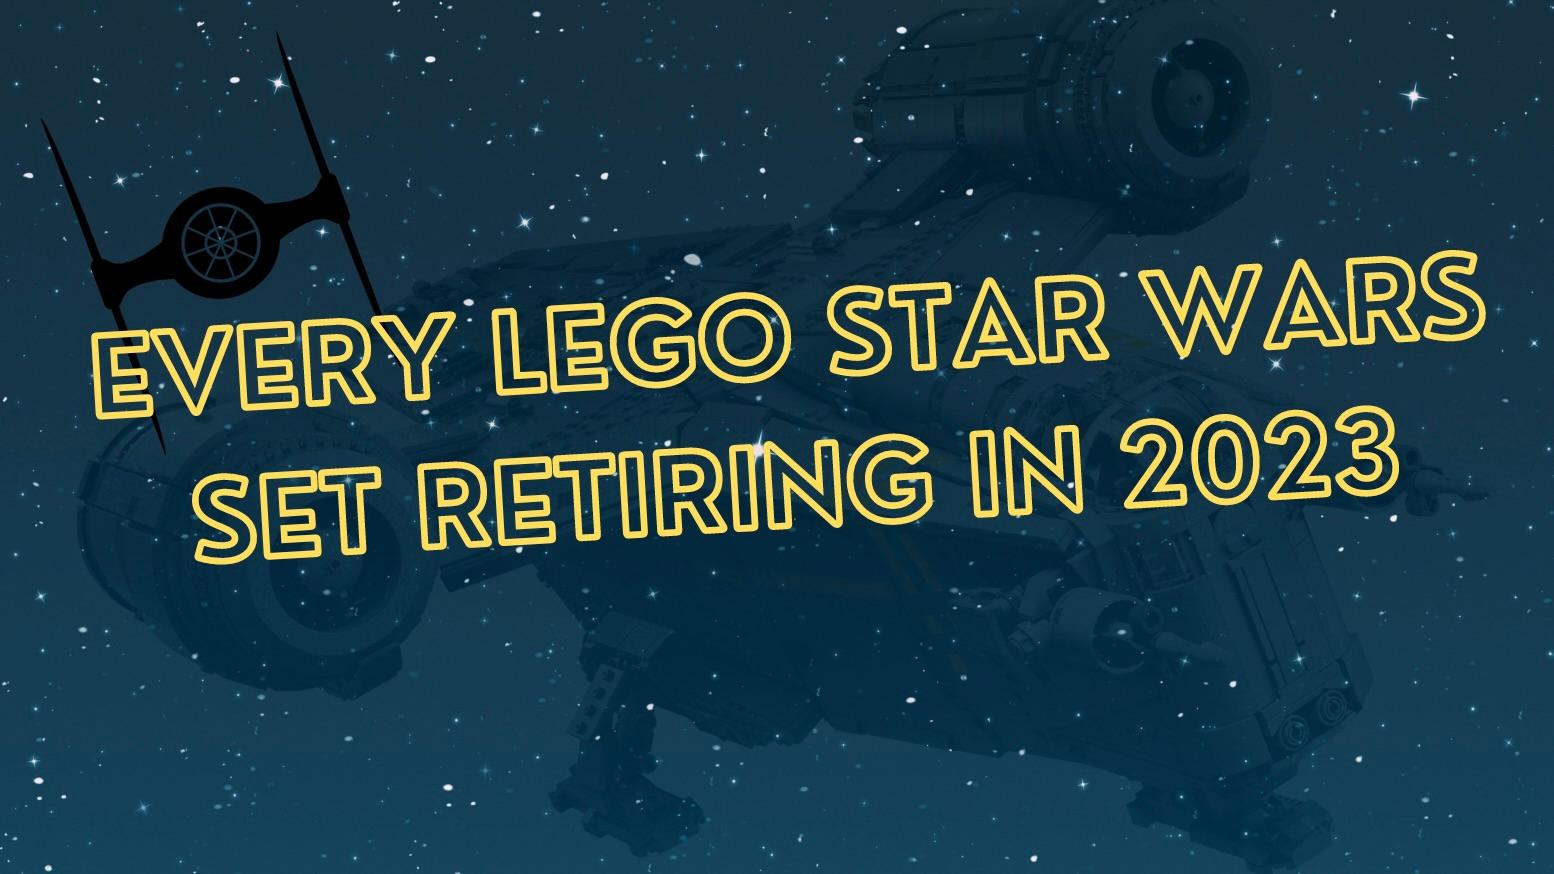 A comprehensive list of all the LEGO Star Wars sets retiring in 2023.